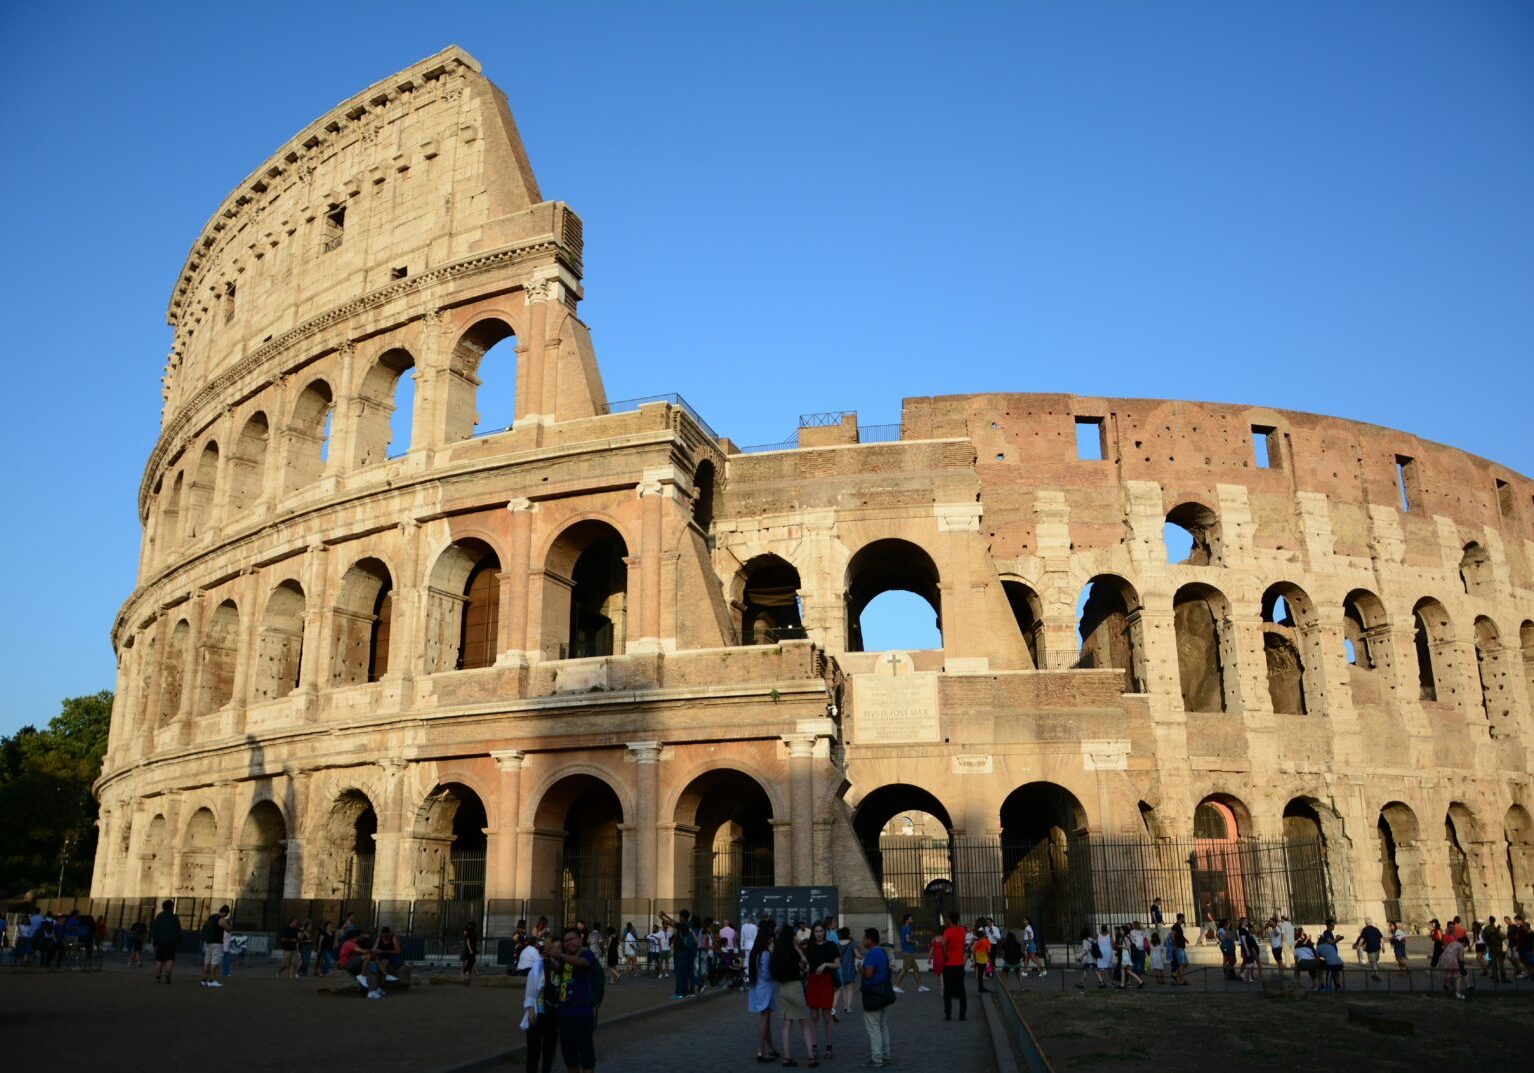 Colosseum in Rome, ancient